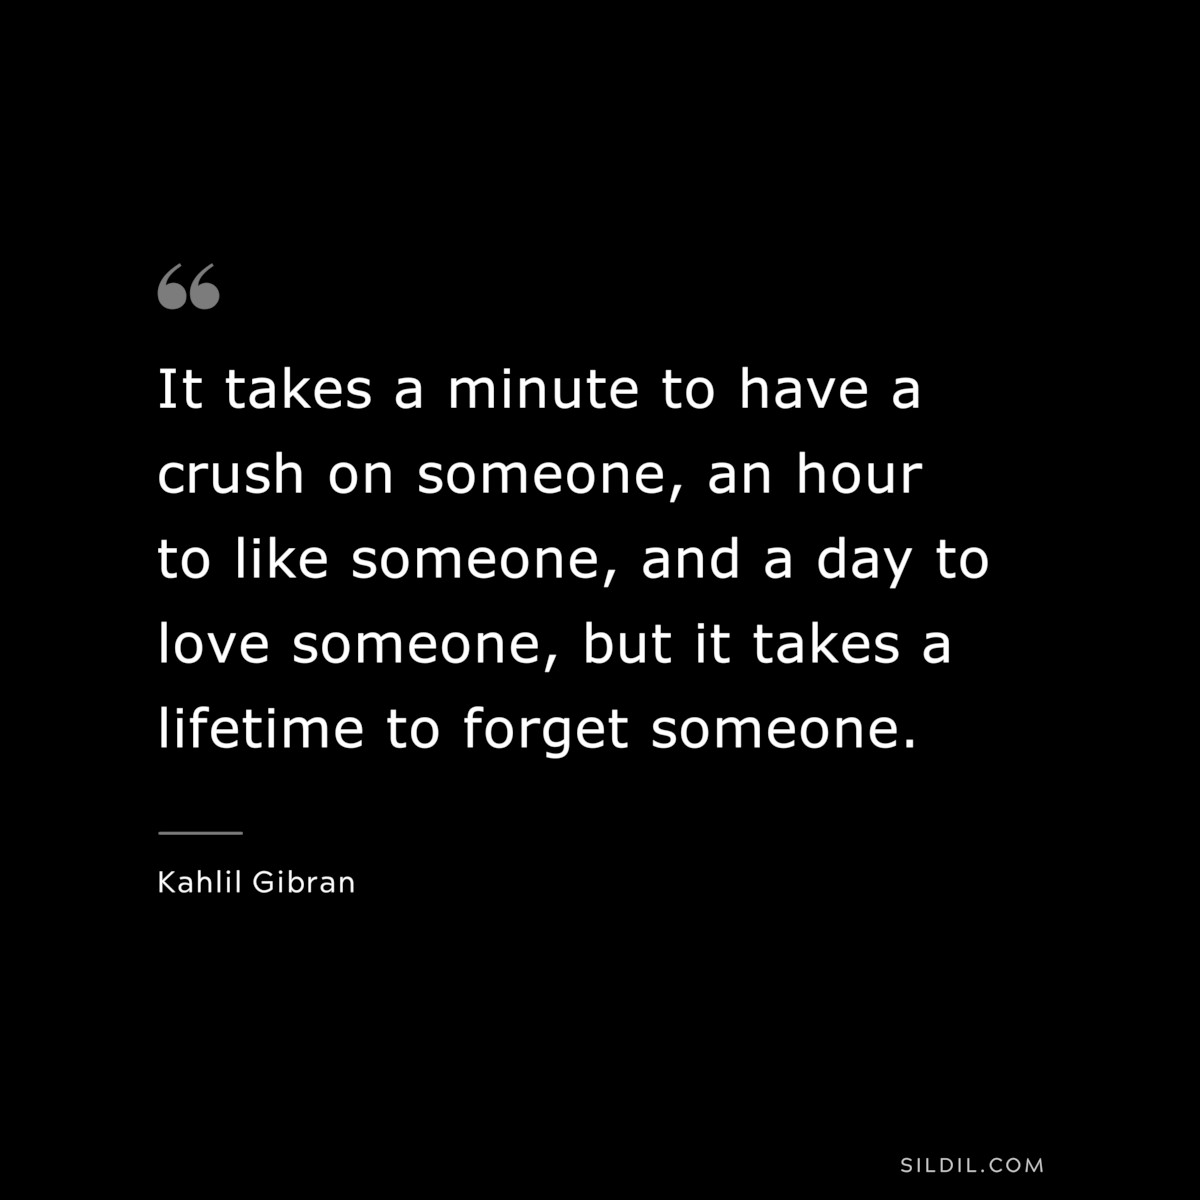 It takes a minute to have a crush on someone, an hour to like someone, and a day to love someone, but it takes a lifetime to forget someone. ― Kahlil Gibran